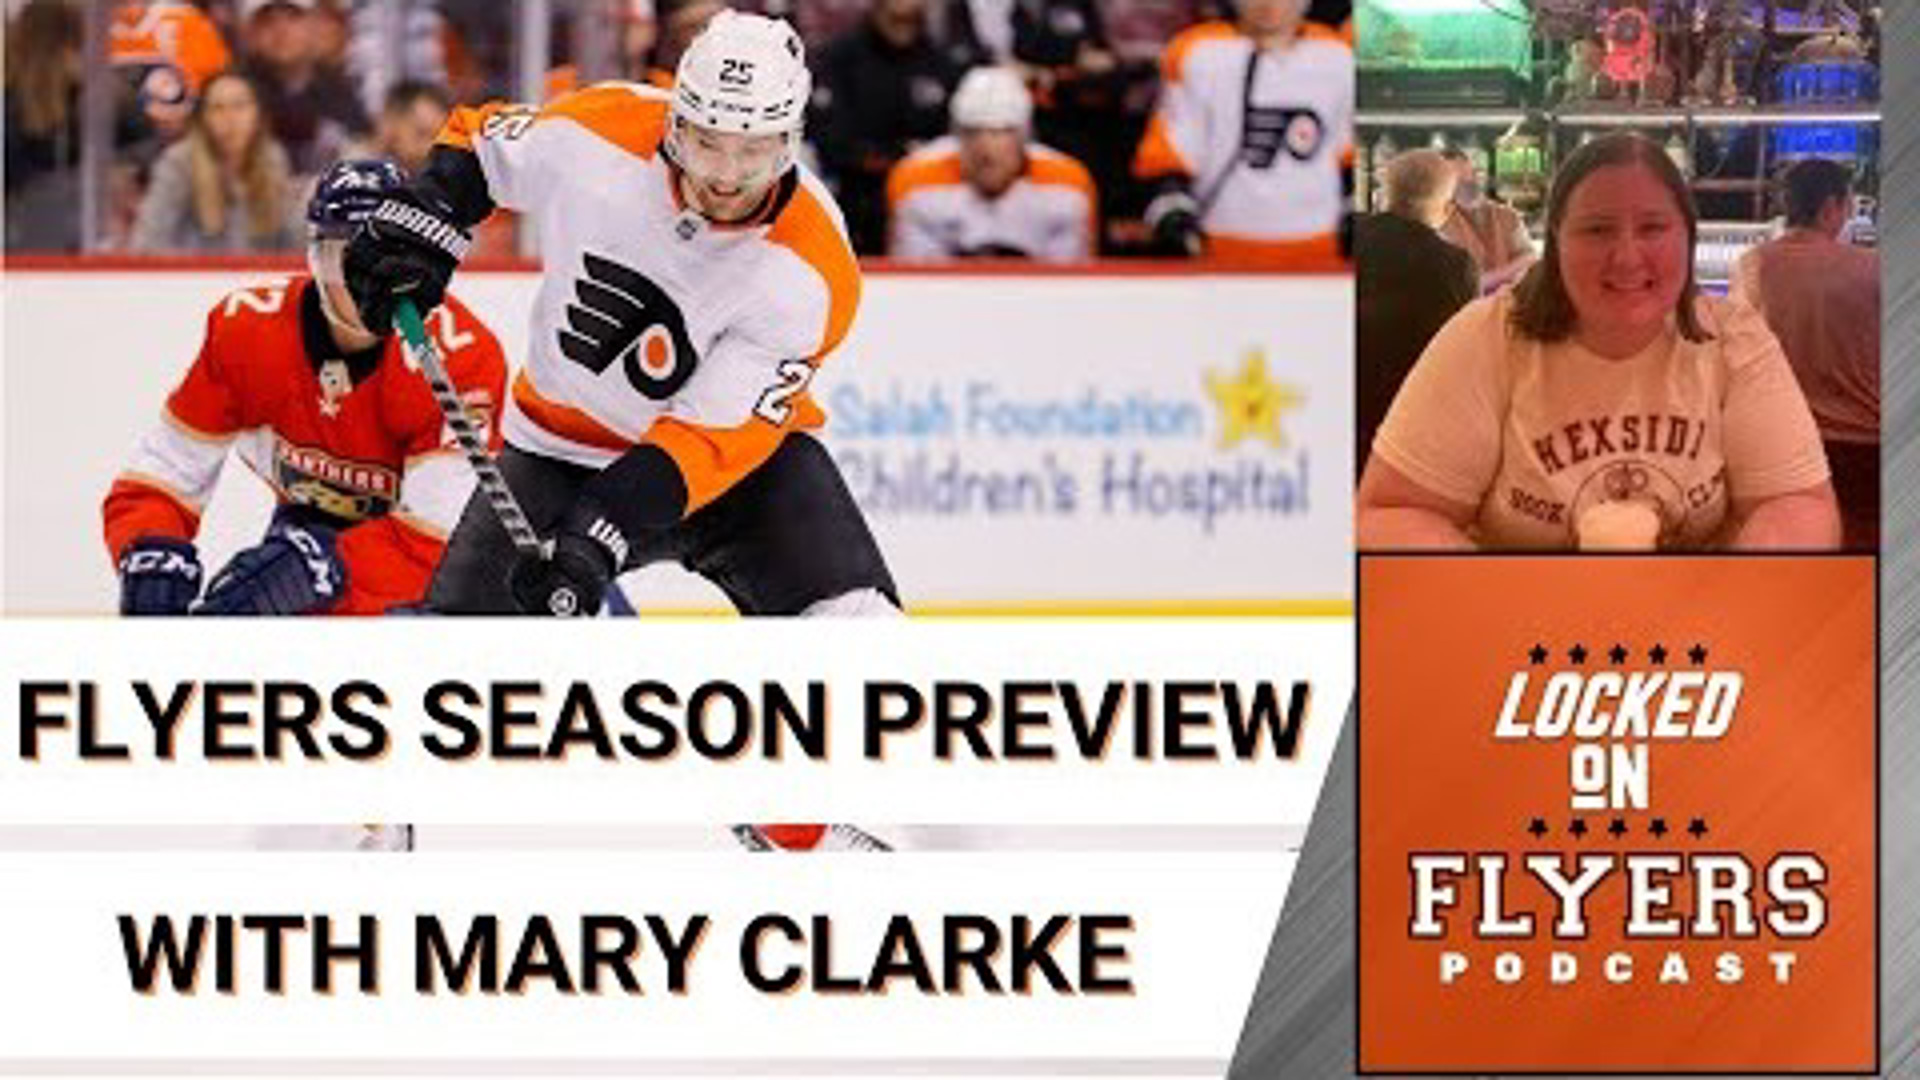 Mary Clarke of For The Win helps preview the Flyers' season.